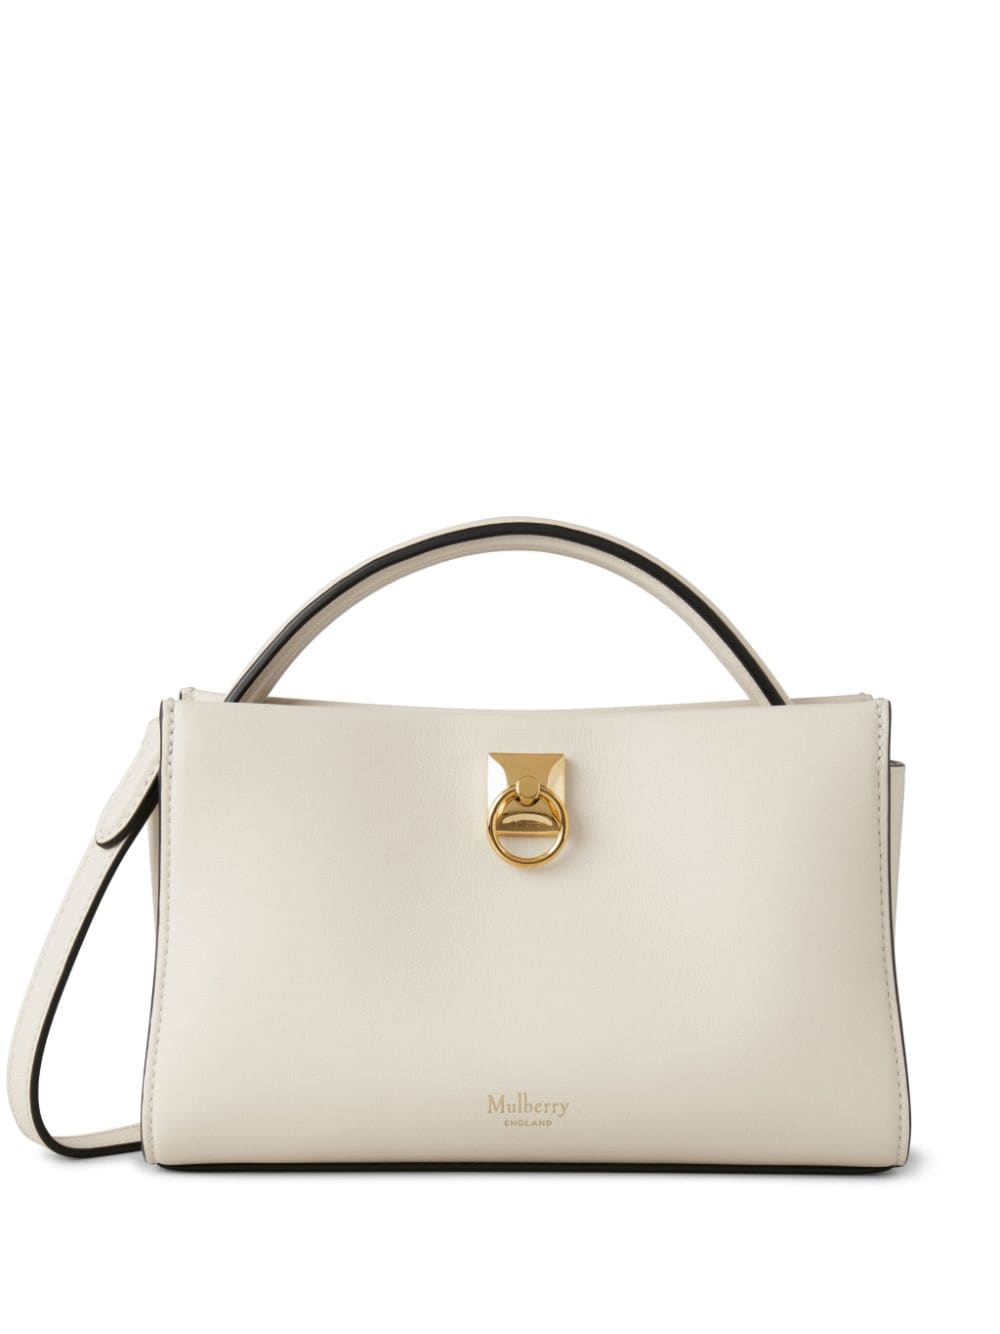 Mulberry Mini Iris Leather Tote Bag In Neutral